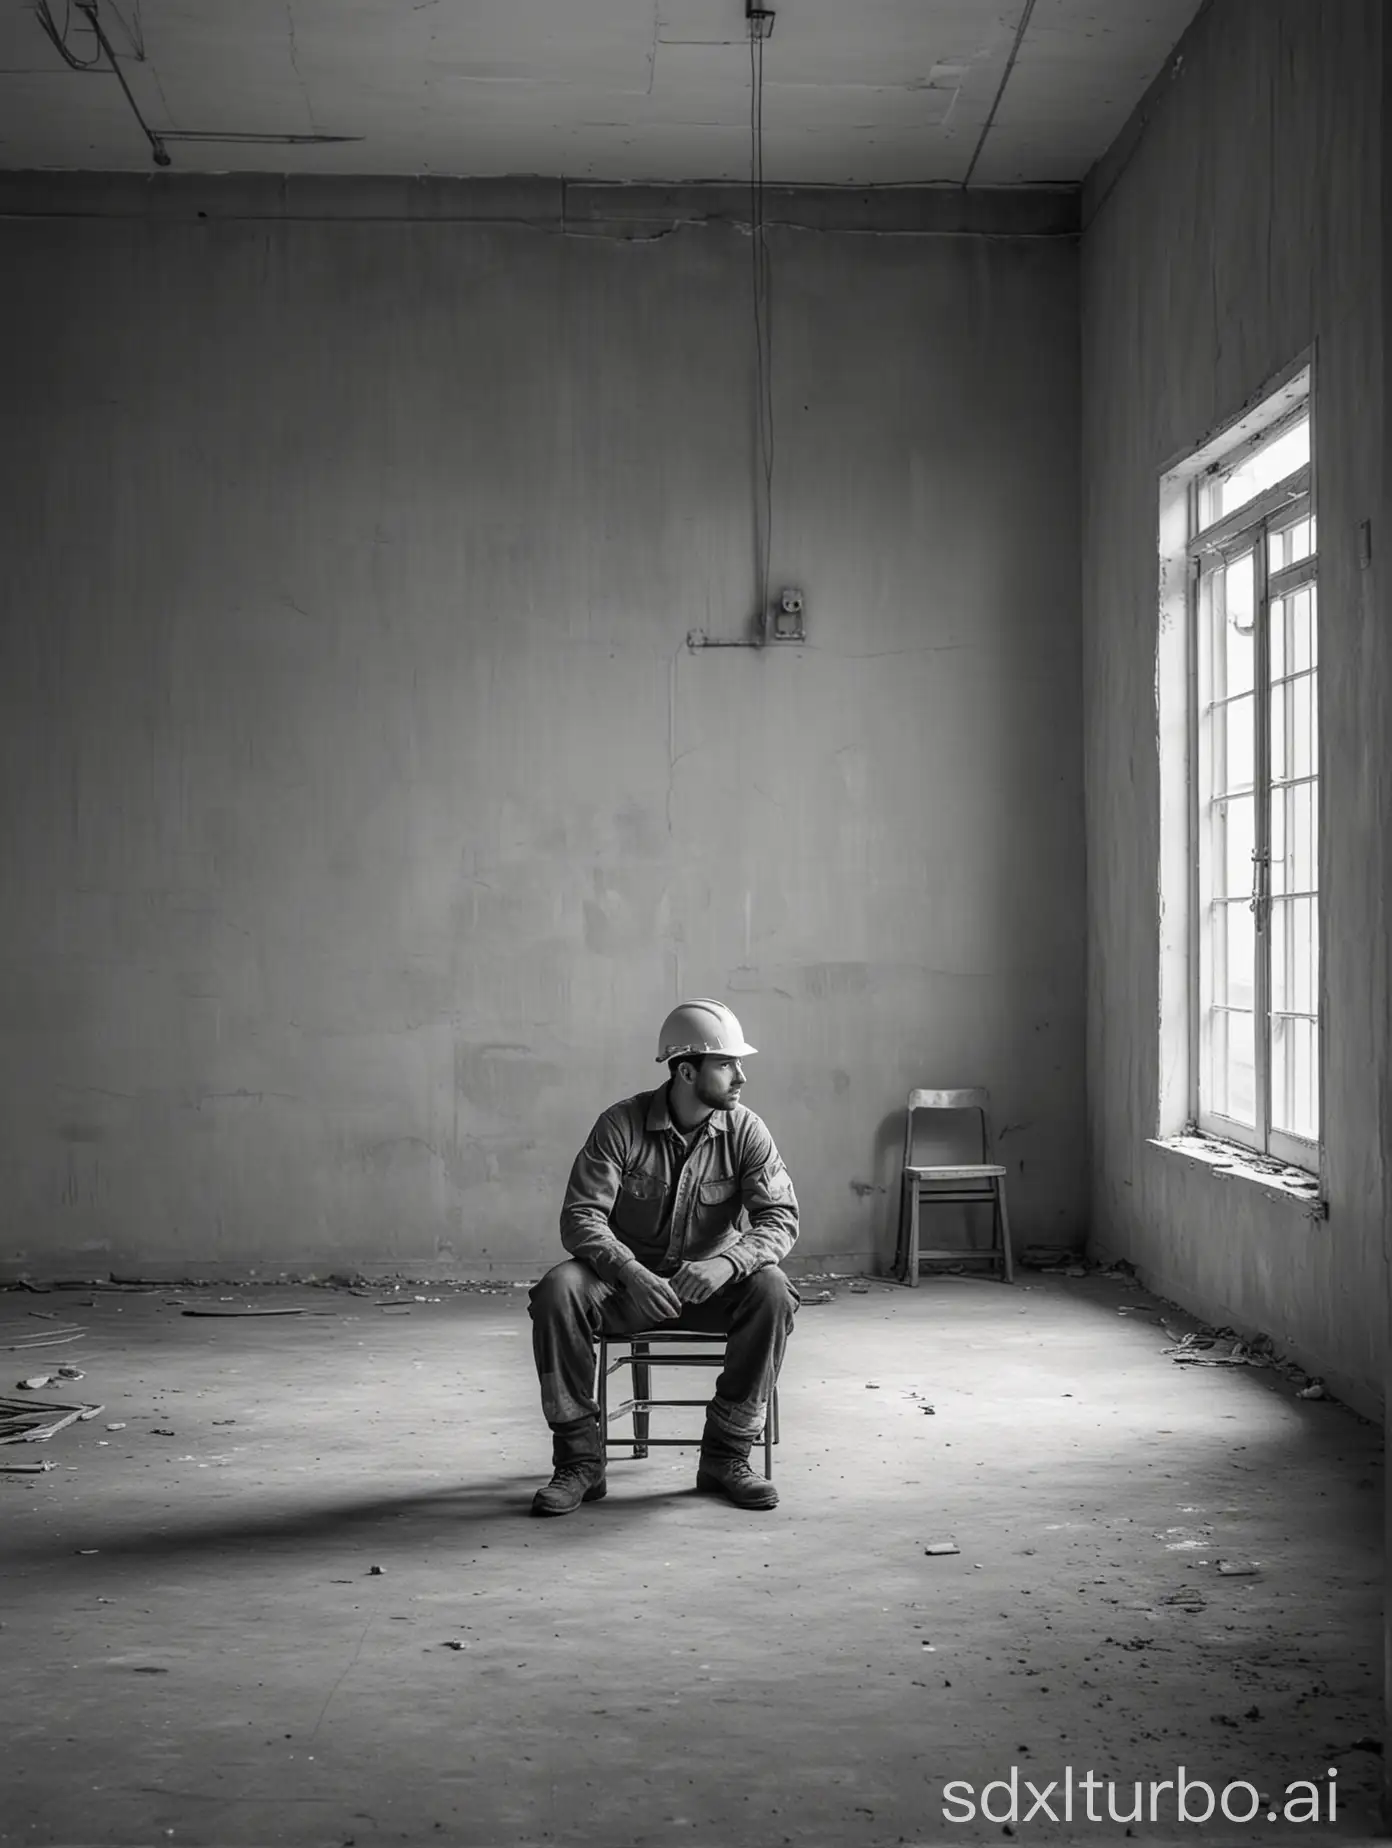 The engineer sits on a chair alone in an empty room in black and white tone looking at the camera